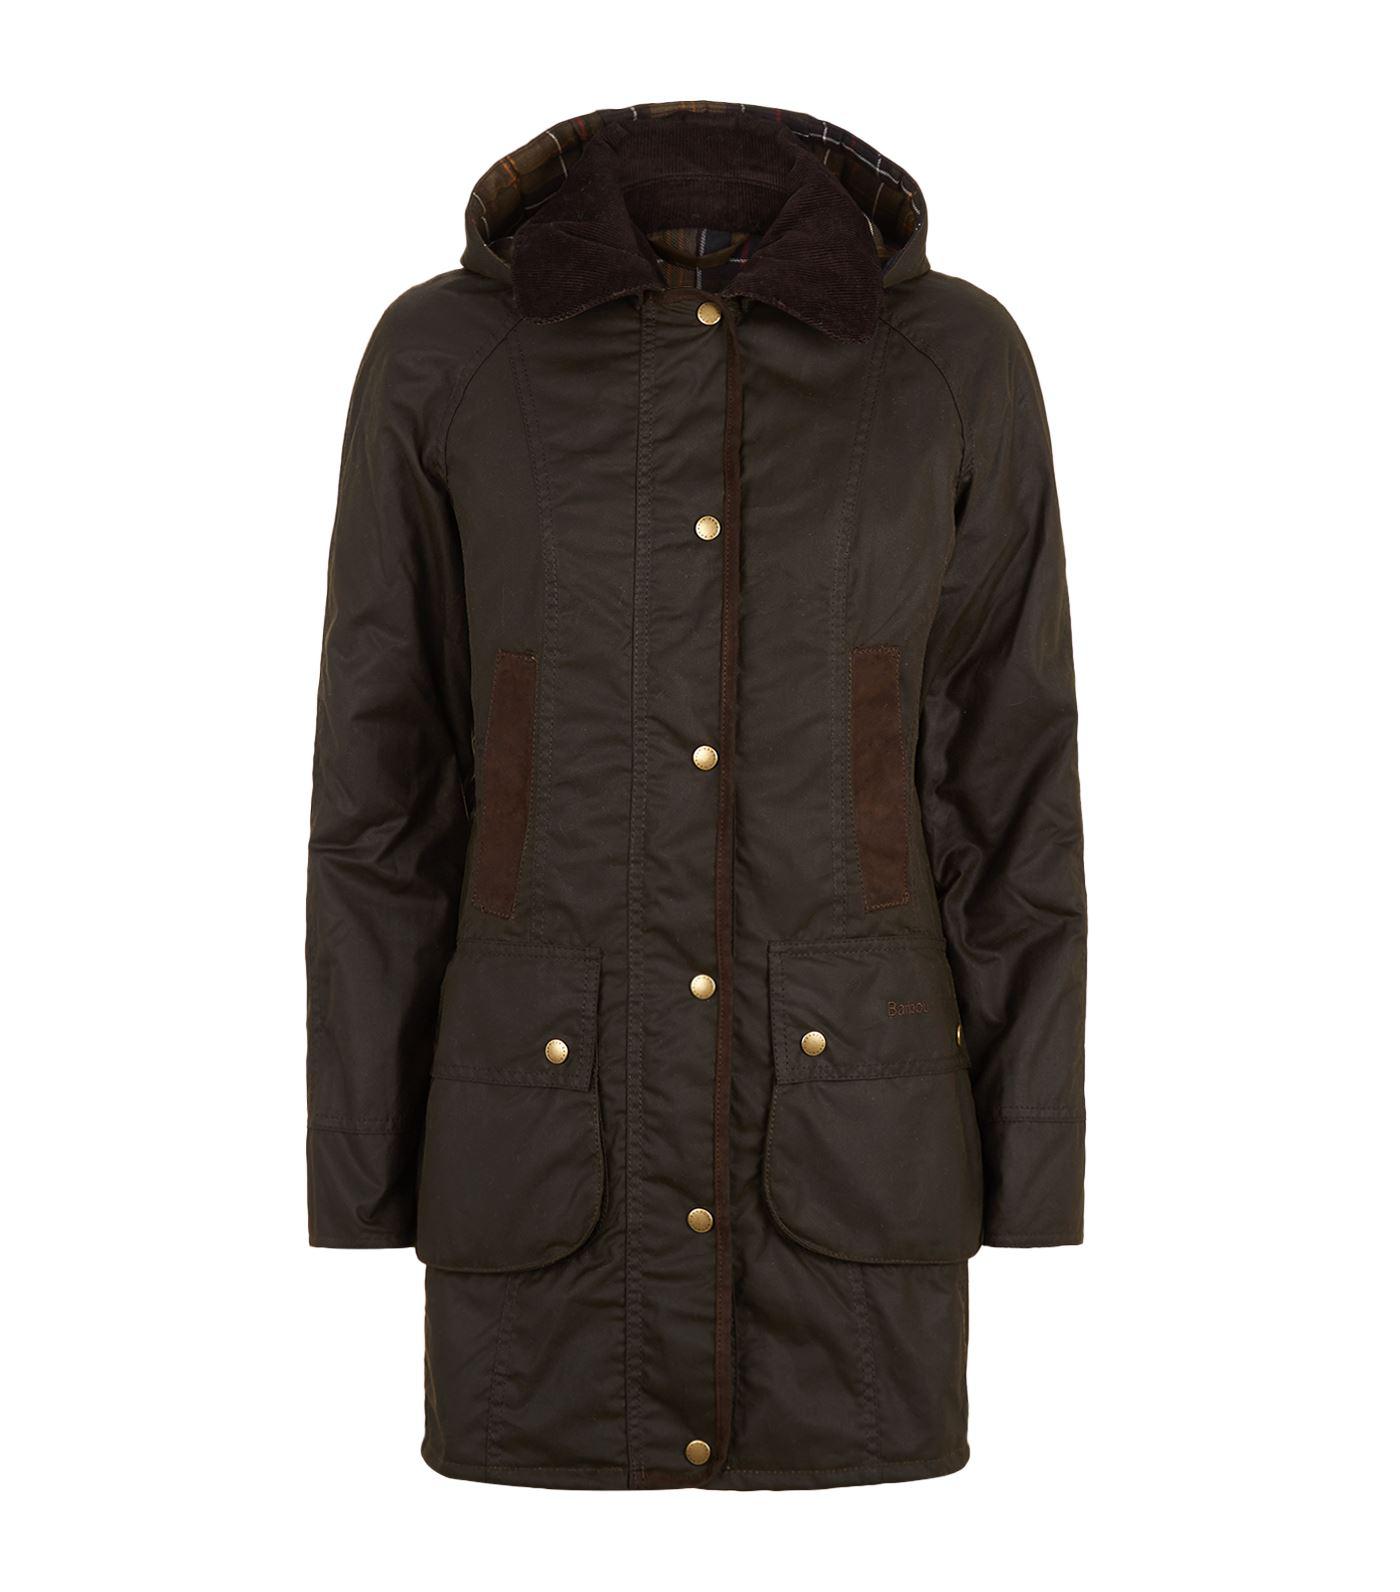 Lyst - Barbour Bower Wax Hooded Jacket in Green